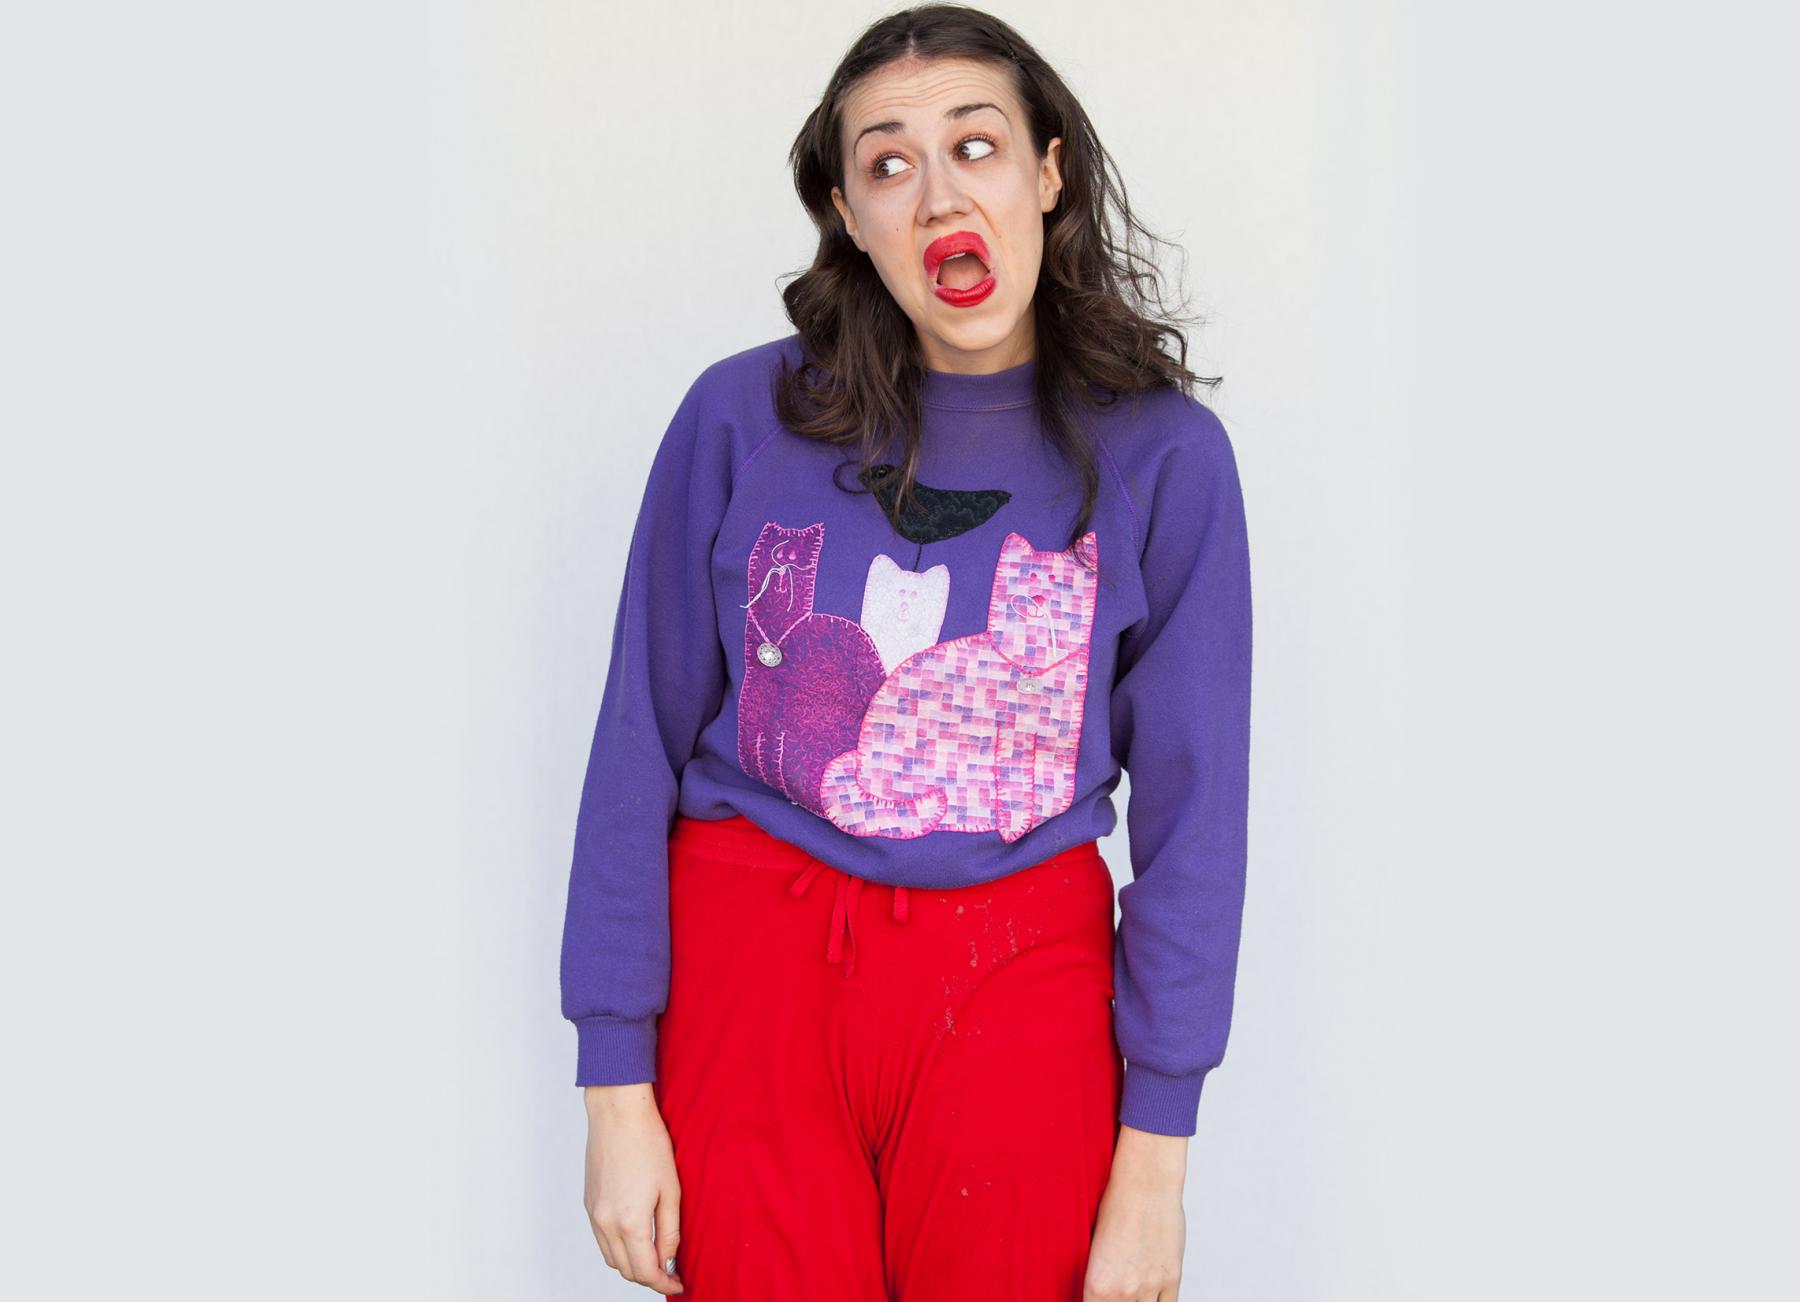 Haters Back Off: Netflix Orders Comedy from YouTuber Miranda Sings.